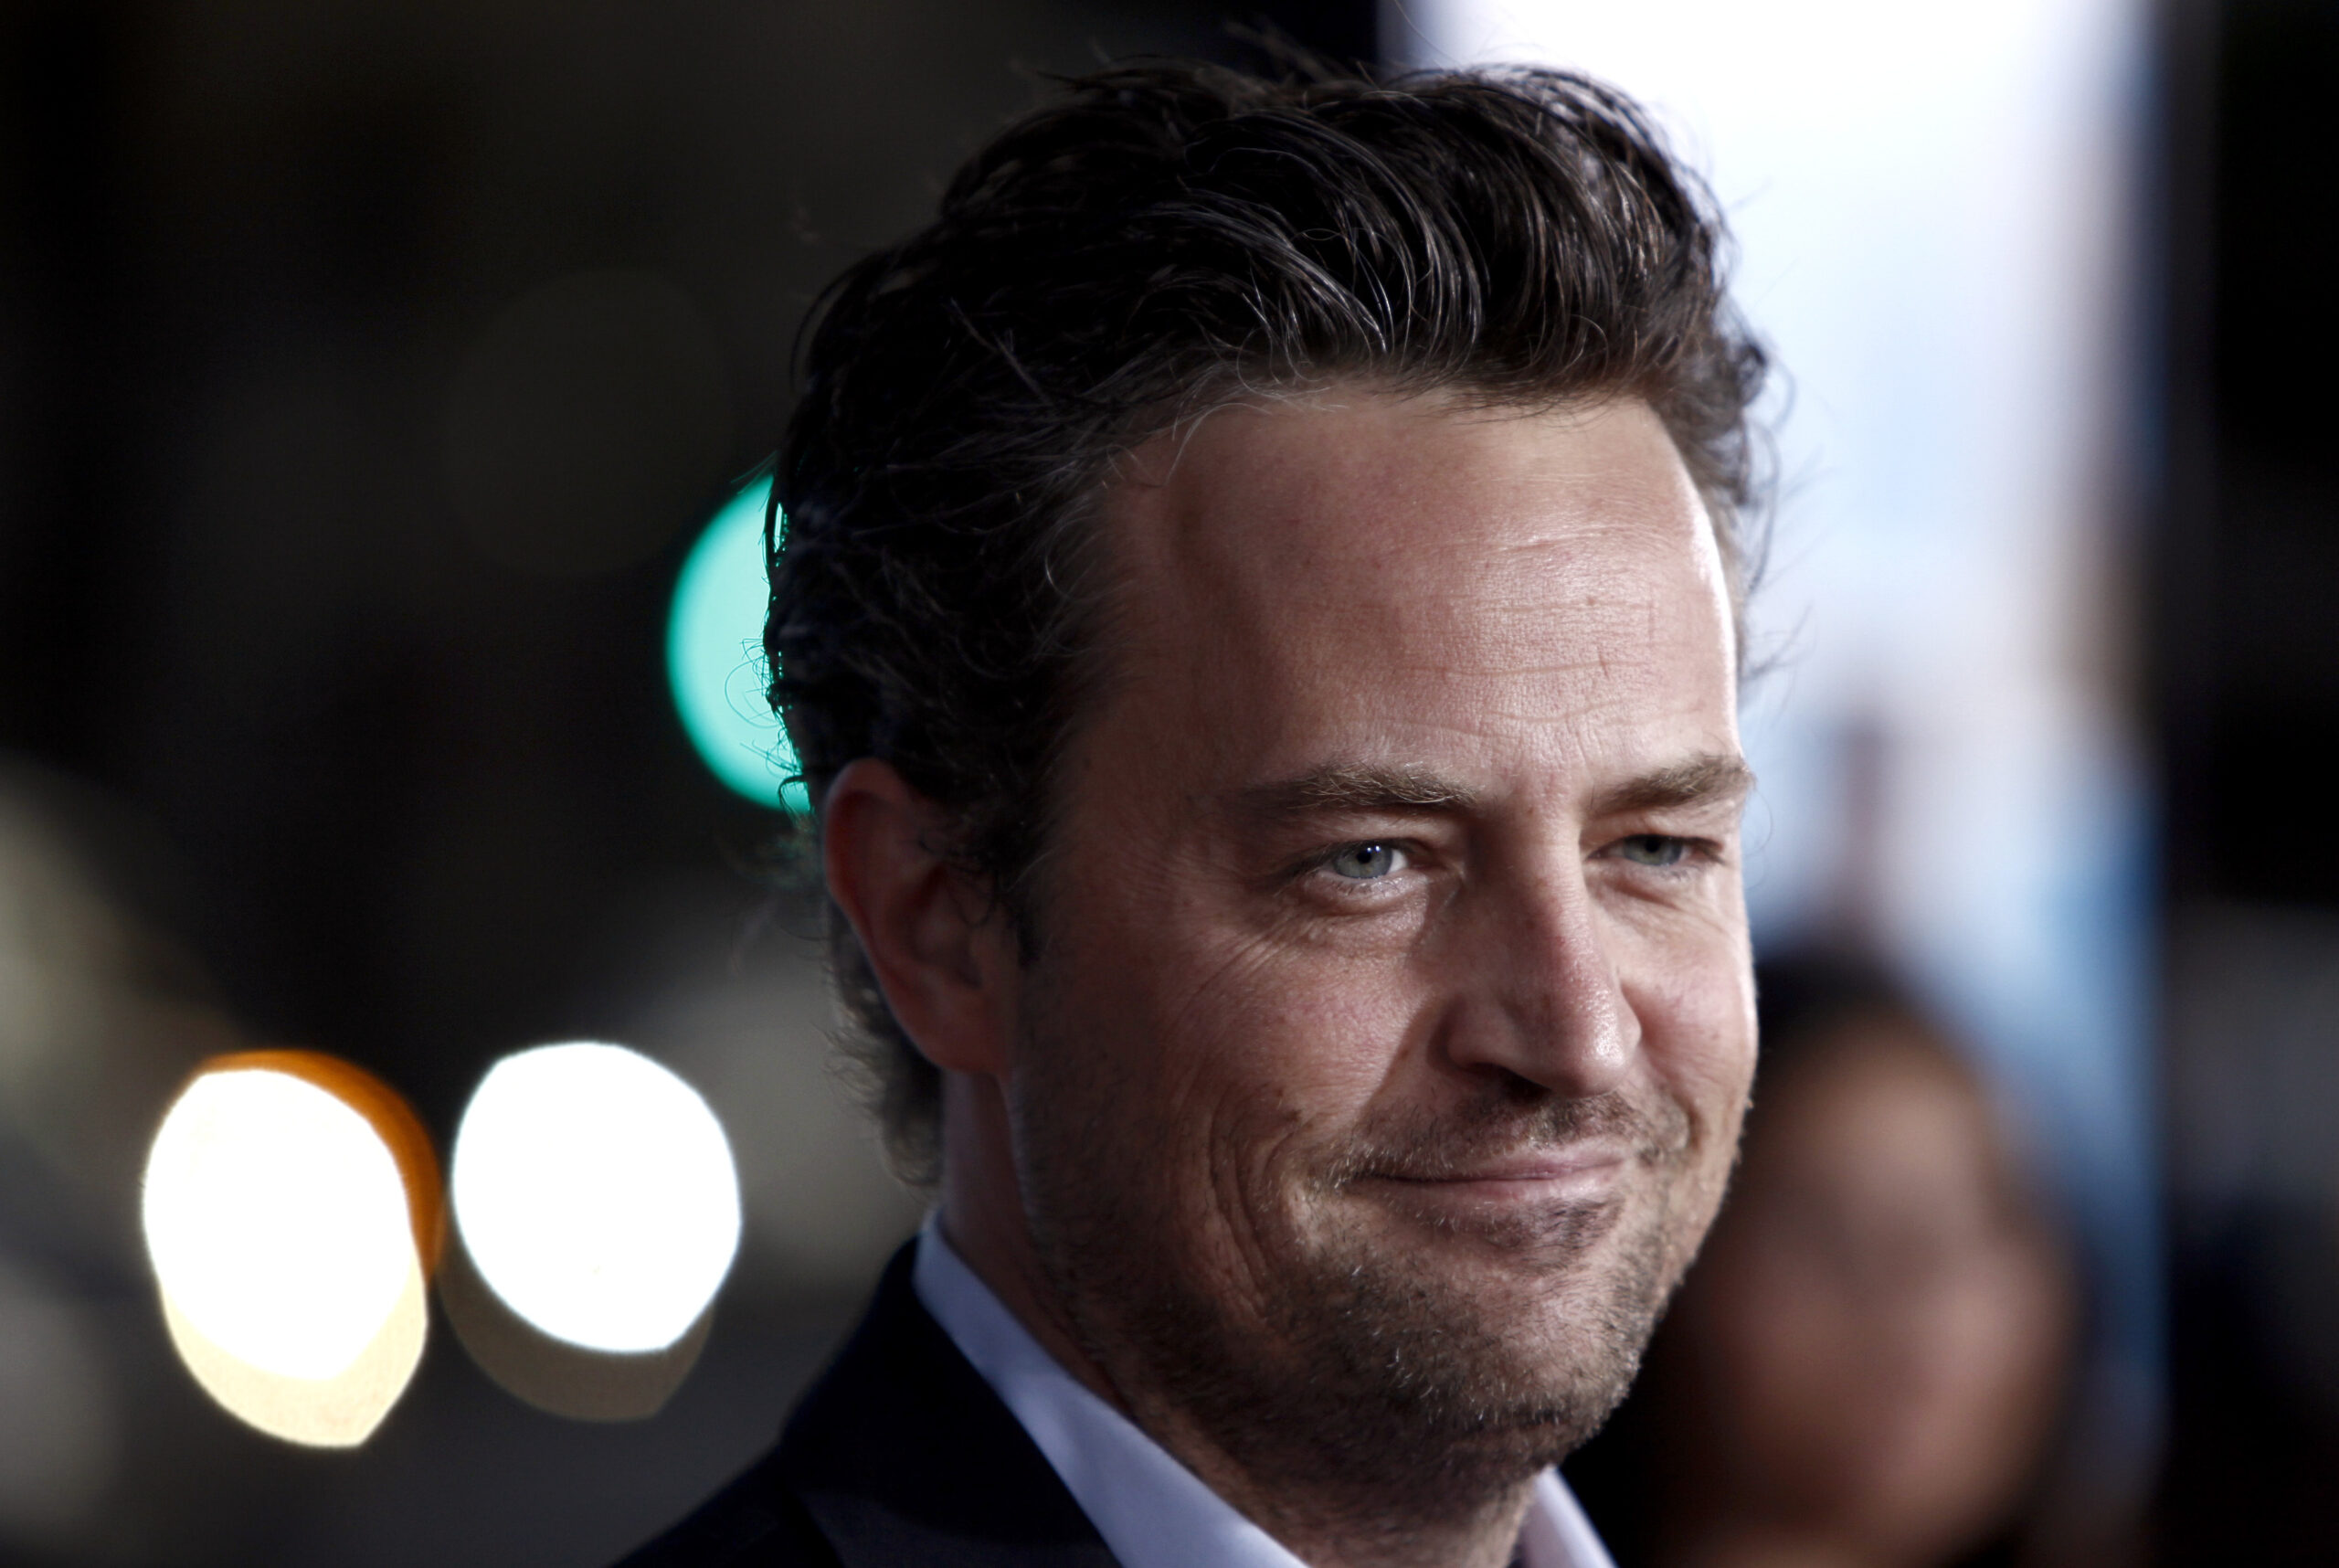 Matthew Perry arrives at the premiere of "The Invention of Lying" in Los Angeles on Monday, Sept. 2...